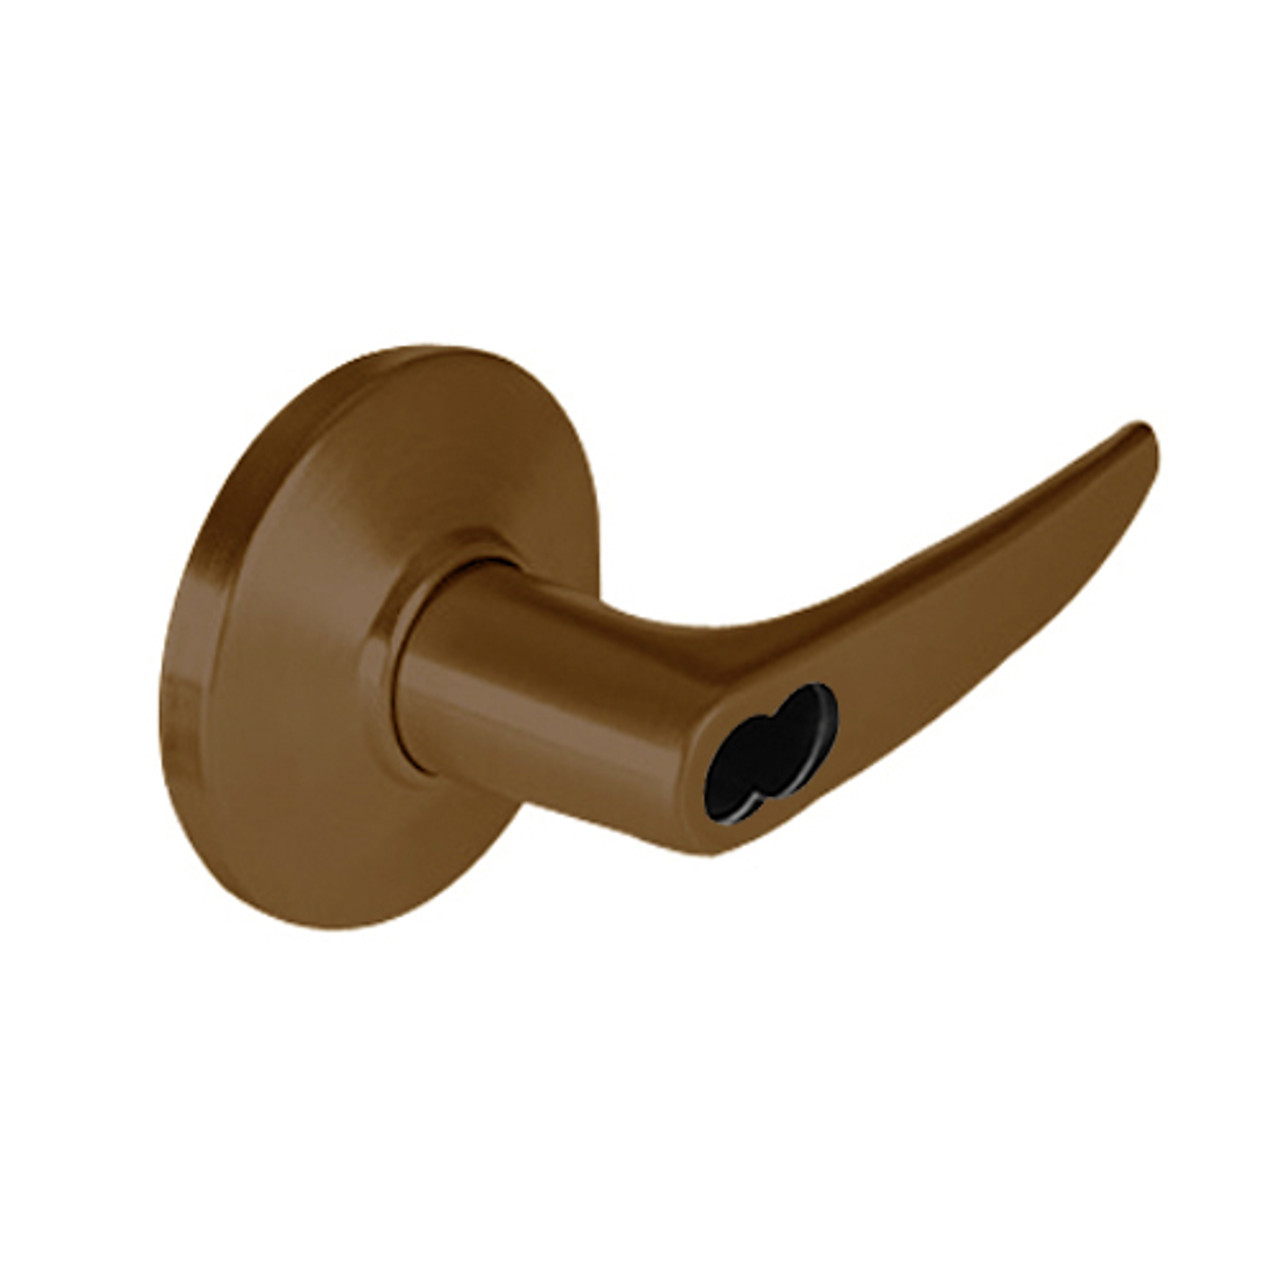 9K37XD16DSTK690 Best 9K Series Special Function Cylindrical Lever Locks with Curved without Return Lever Design Accept 7 Pin Best Core in Dark Bronze